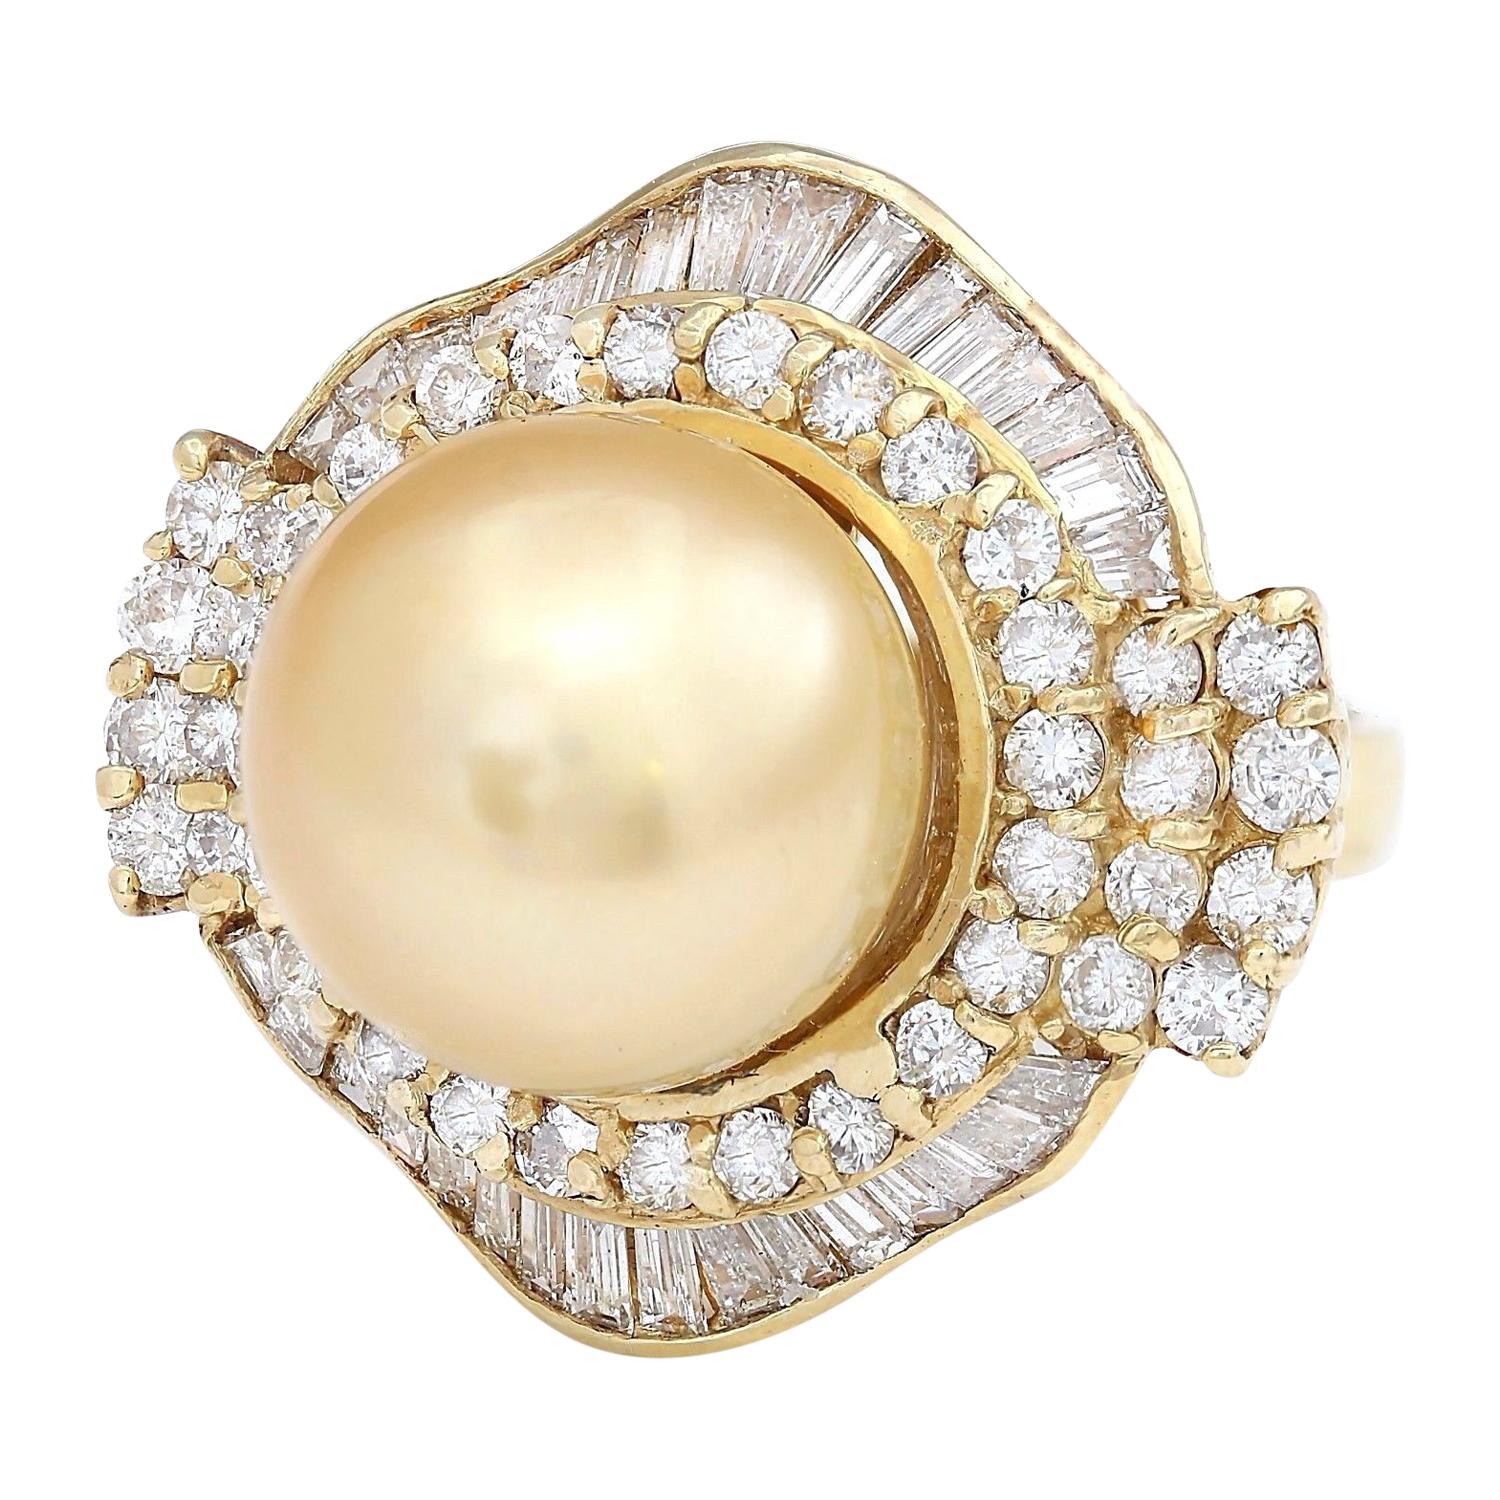 14.08 mm Gold South Sea Pearl 14K Solid Yellow Gold Diamond Ring
Item Type: Ring
Item Style: Cocktail
Material: 14K Yellow Gold
Mainstone: South Sea Pearl
Stone Color: Gold
Stone Shape: Round
Stone Quantity: 1
Stone Dimensions: 14.00x14.00 mm
Stone